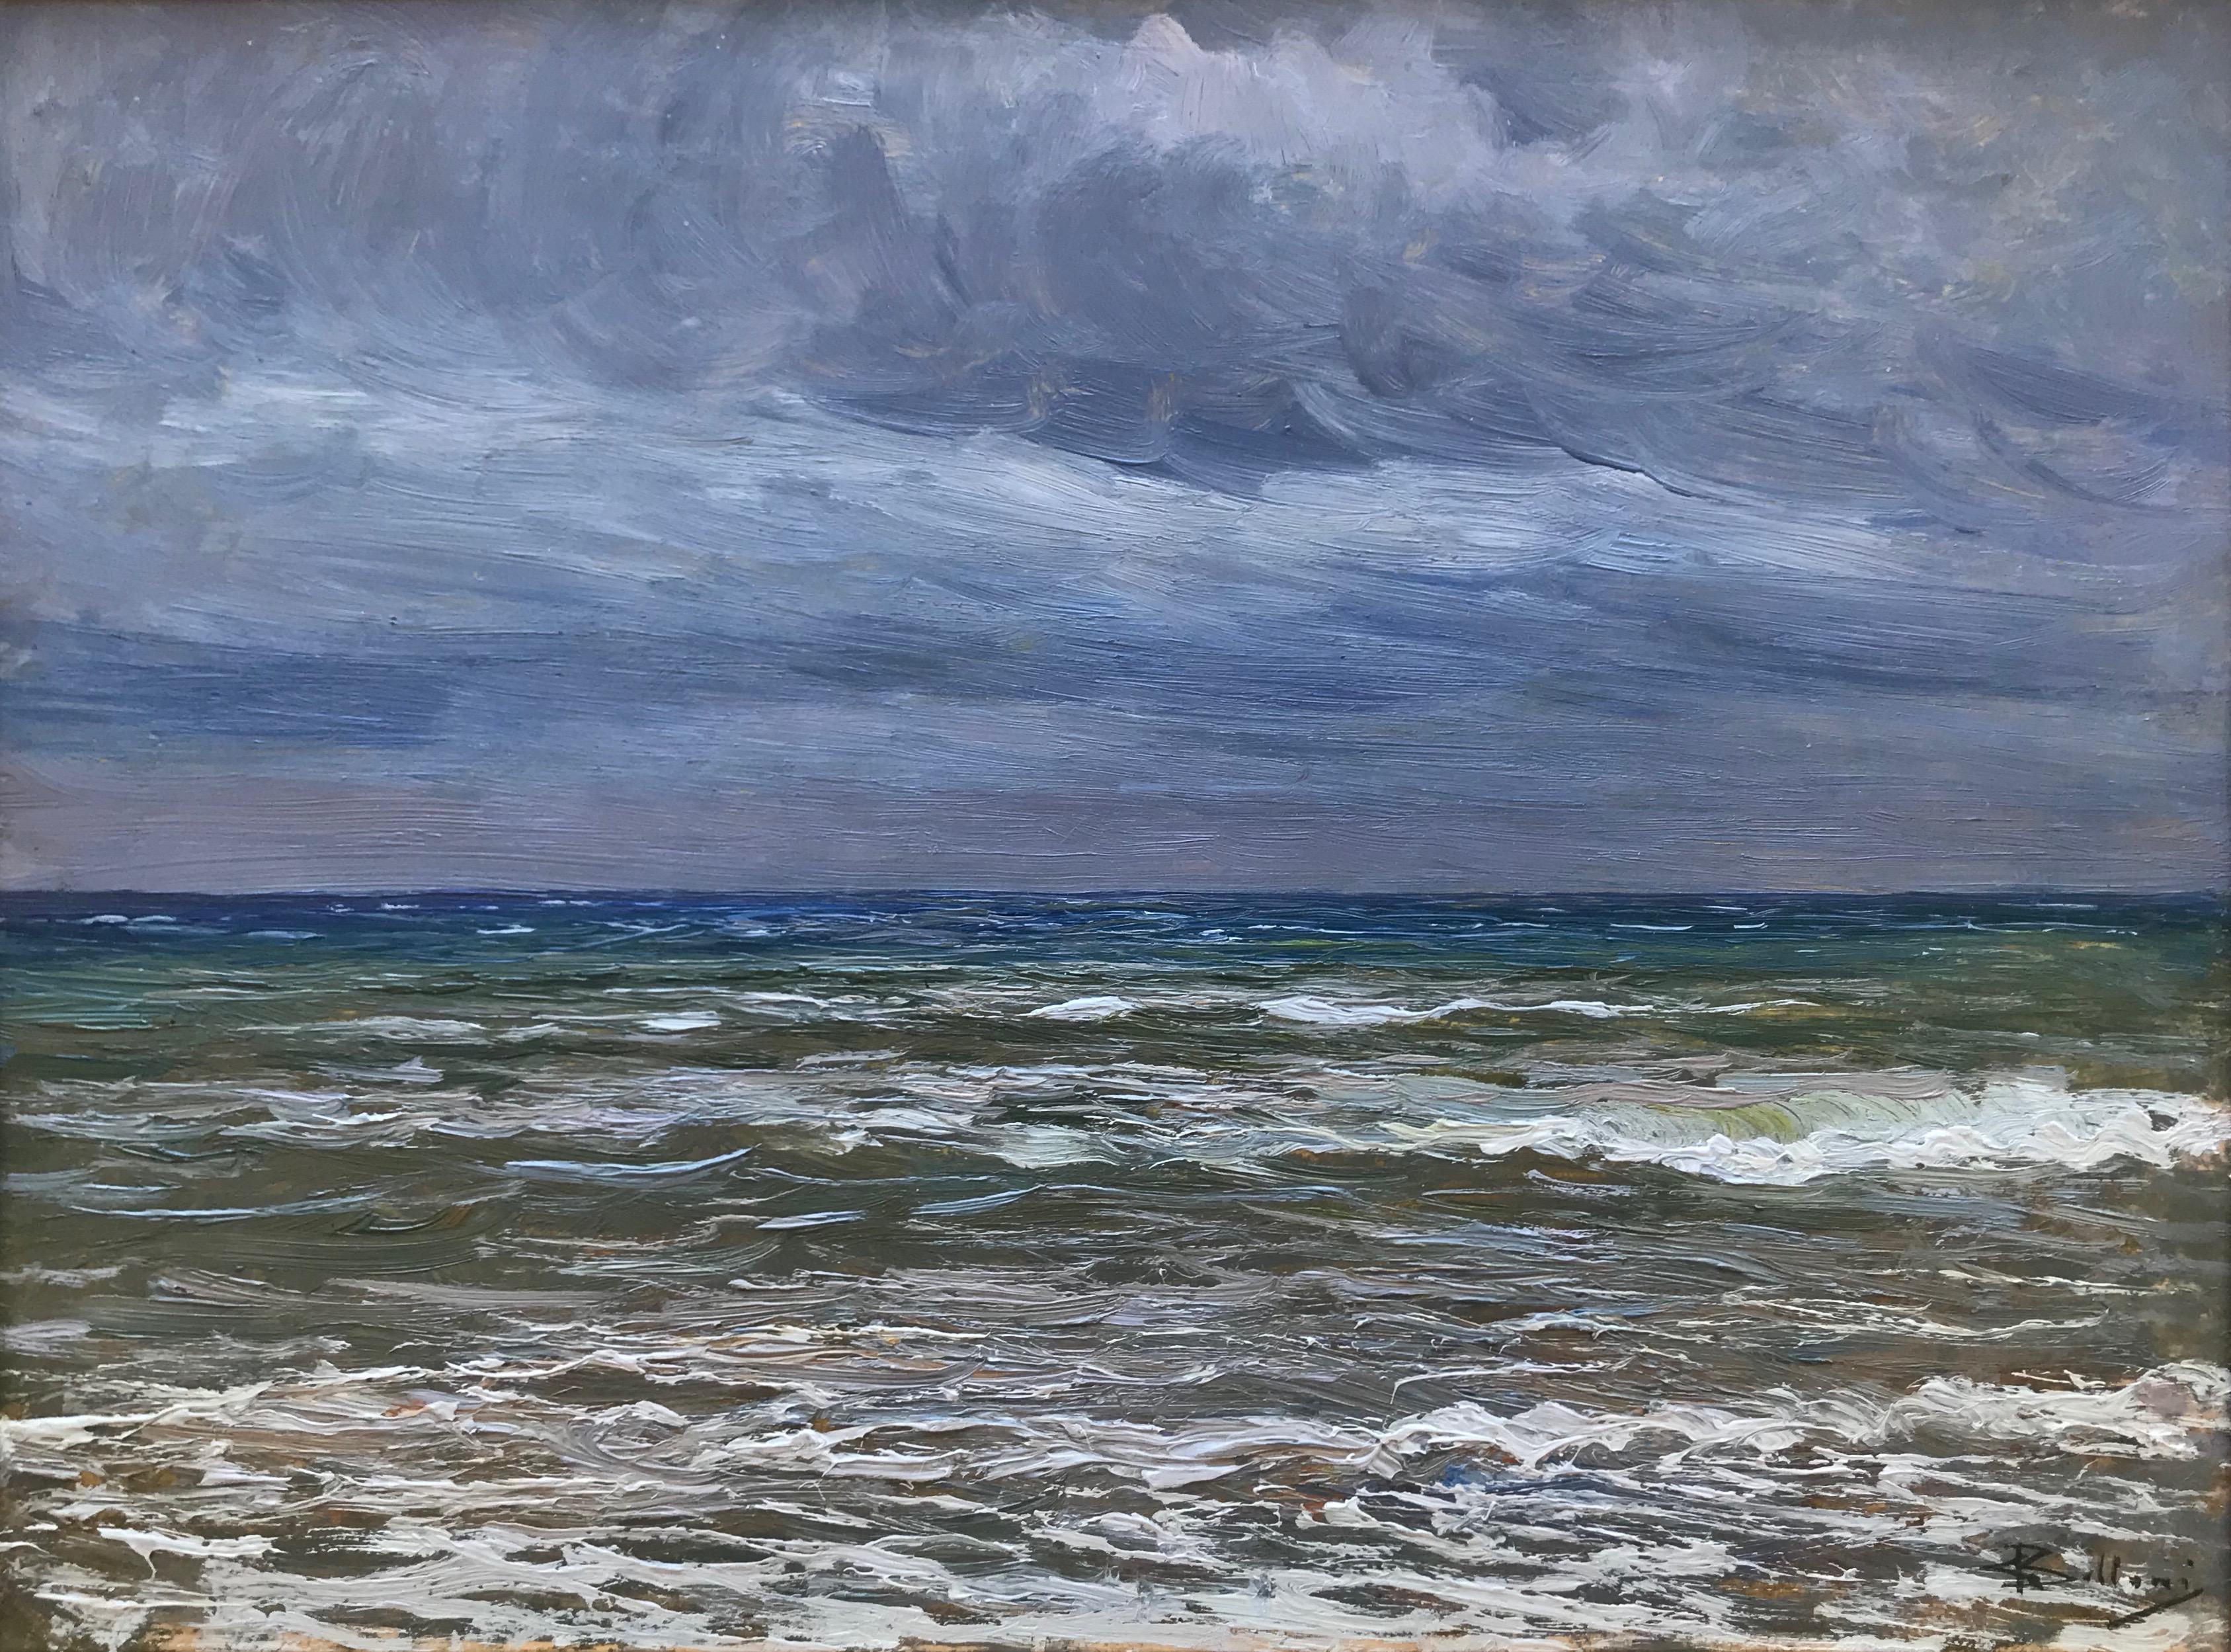 Giorgio Belloni (1861-1944)
Calma,
Signed,
Oil on panel,
11½ x 15¾ inches

A wonderfully atmospheric and meticulously observed seascape by this master of marine painting. A masterclass in plein air painting with fabulous brushwork and